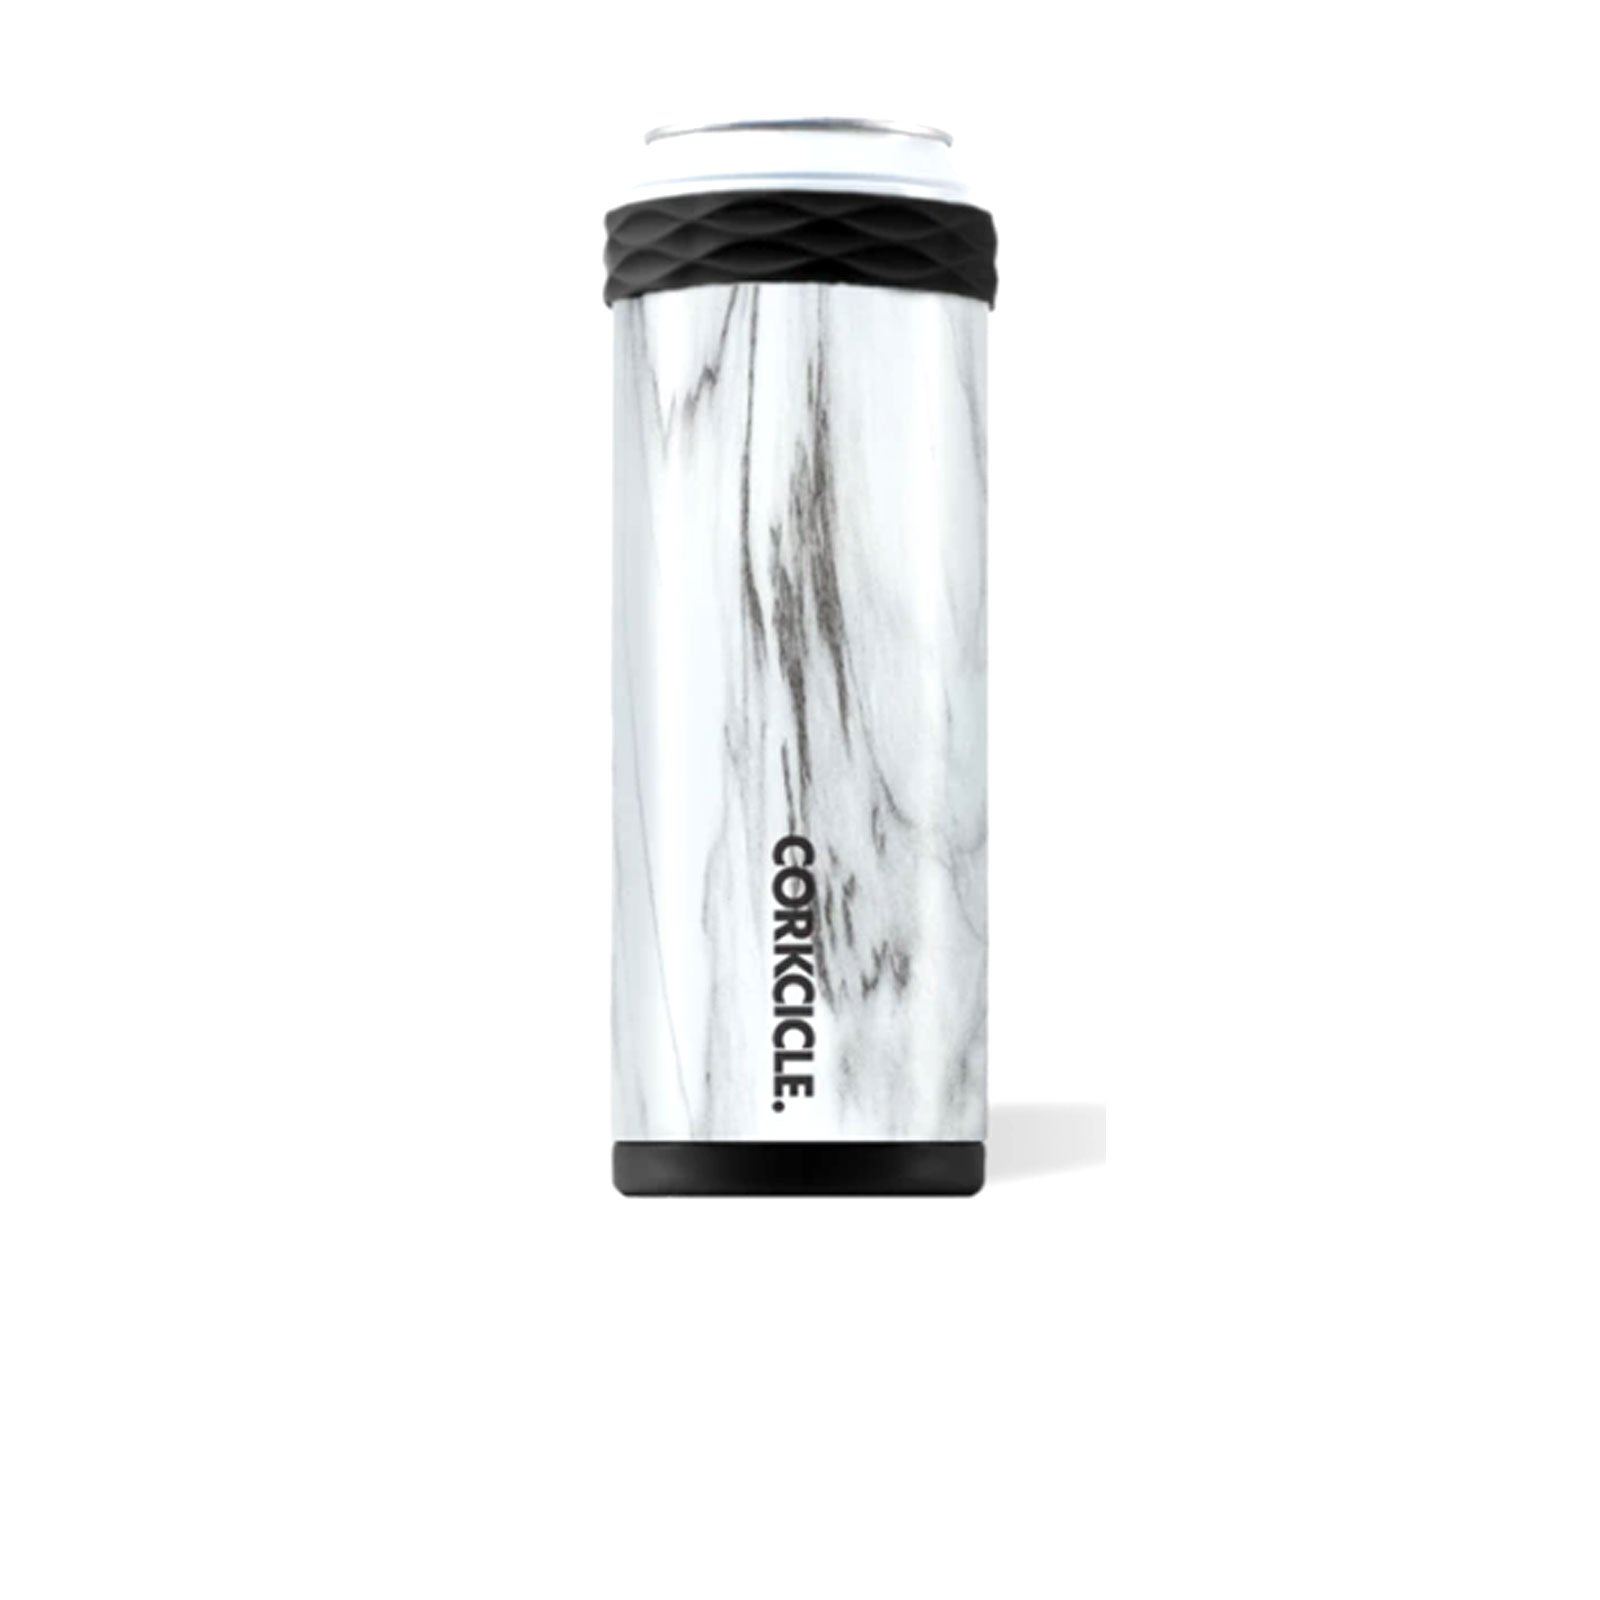 NEW Cold Cup Color Drop - Corkcicle